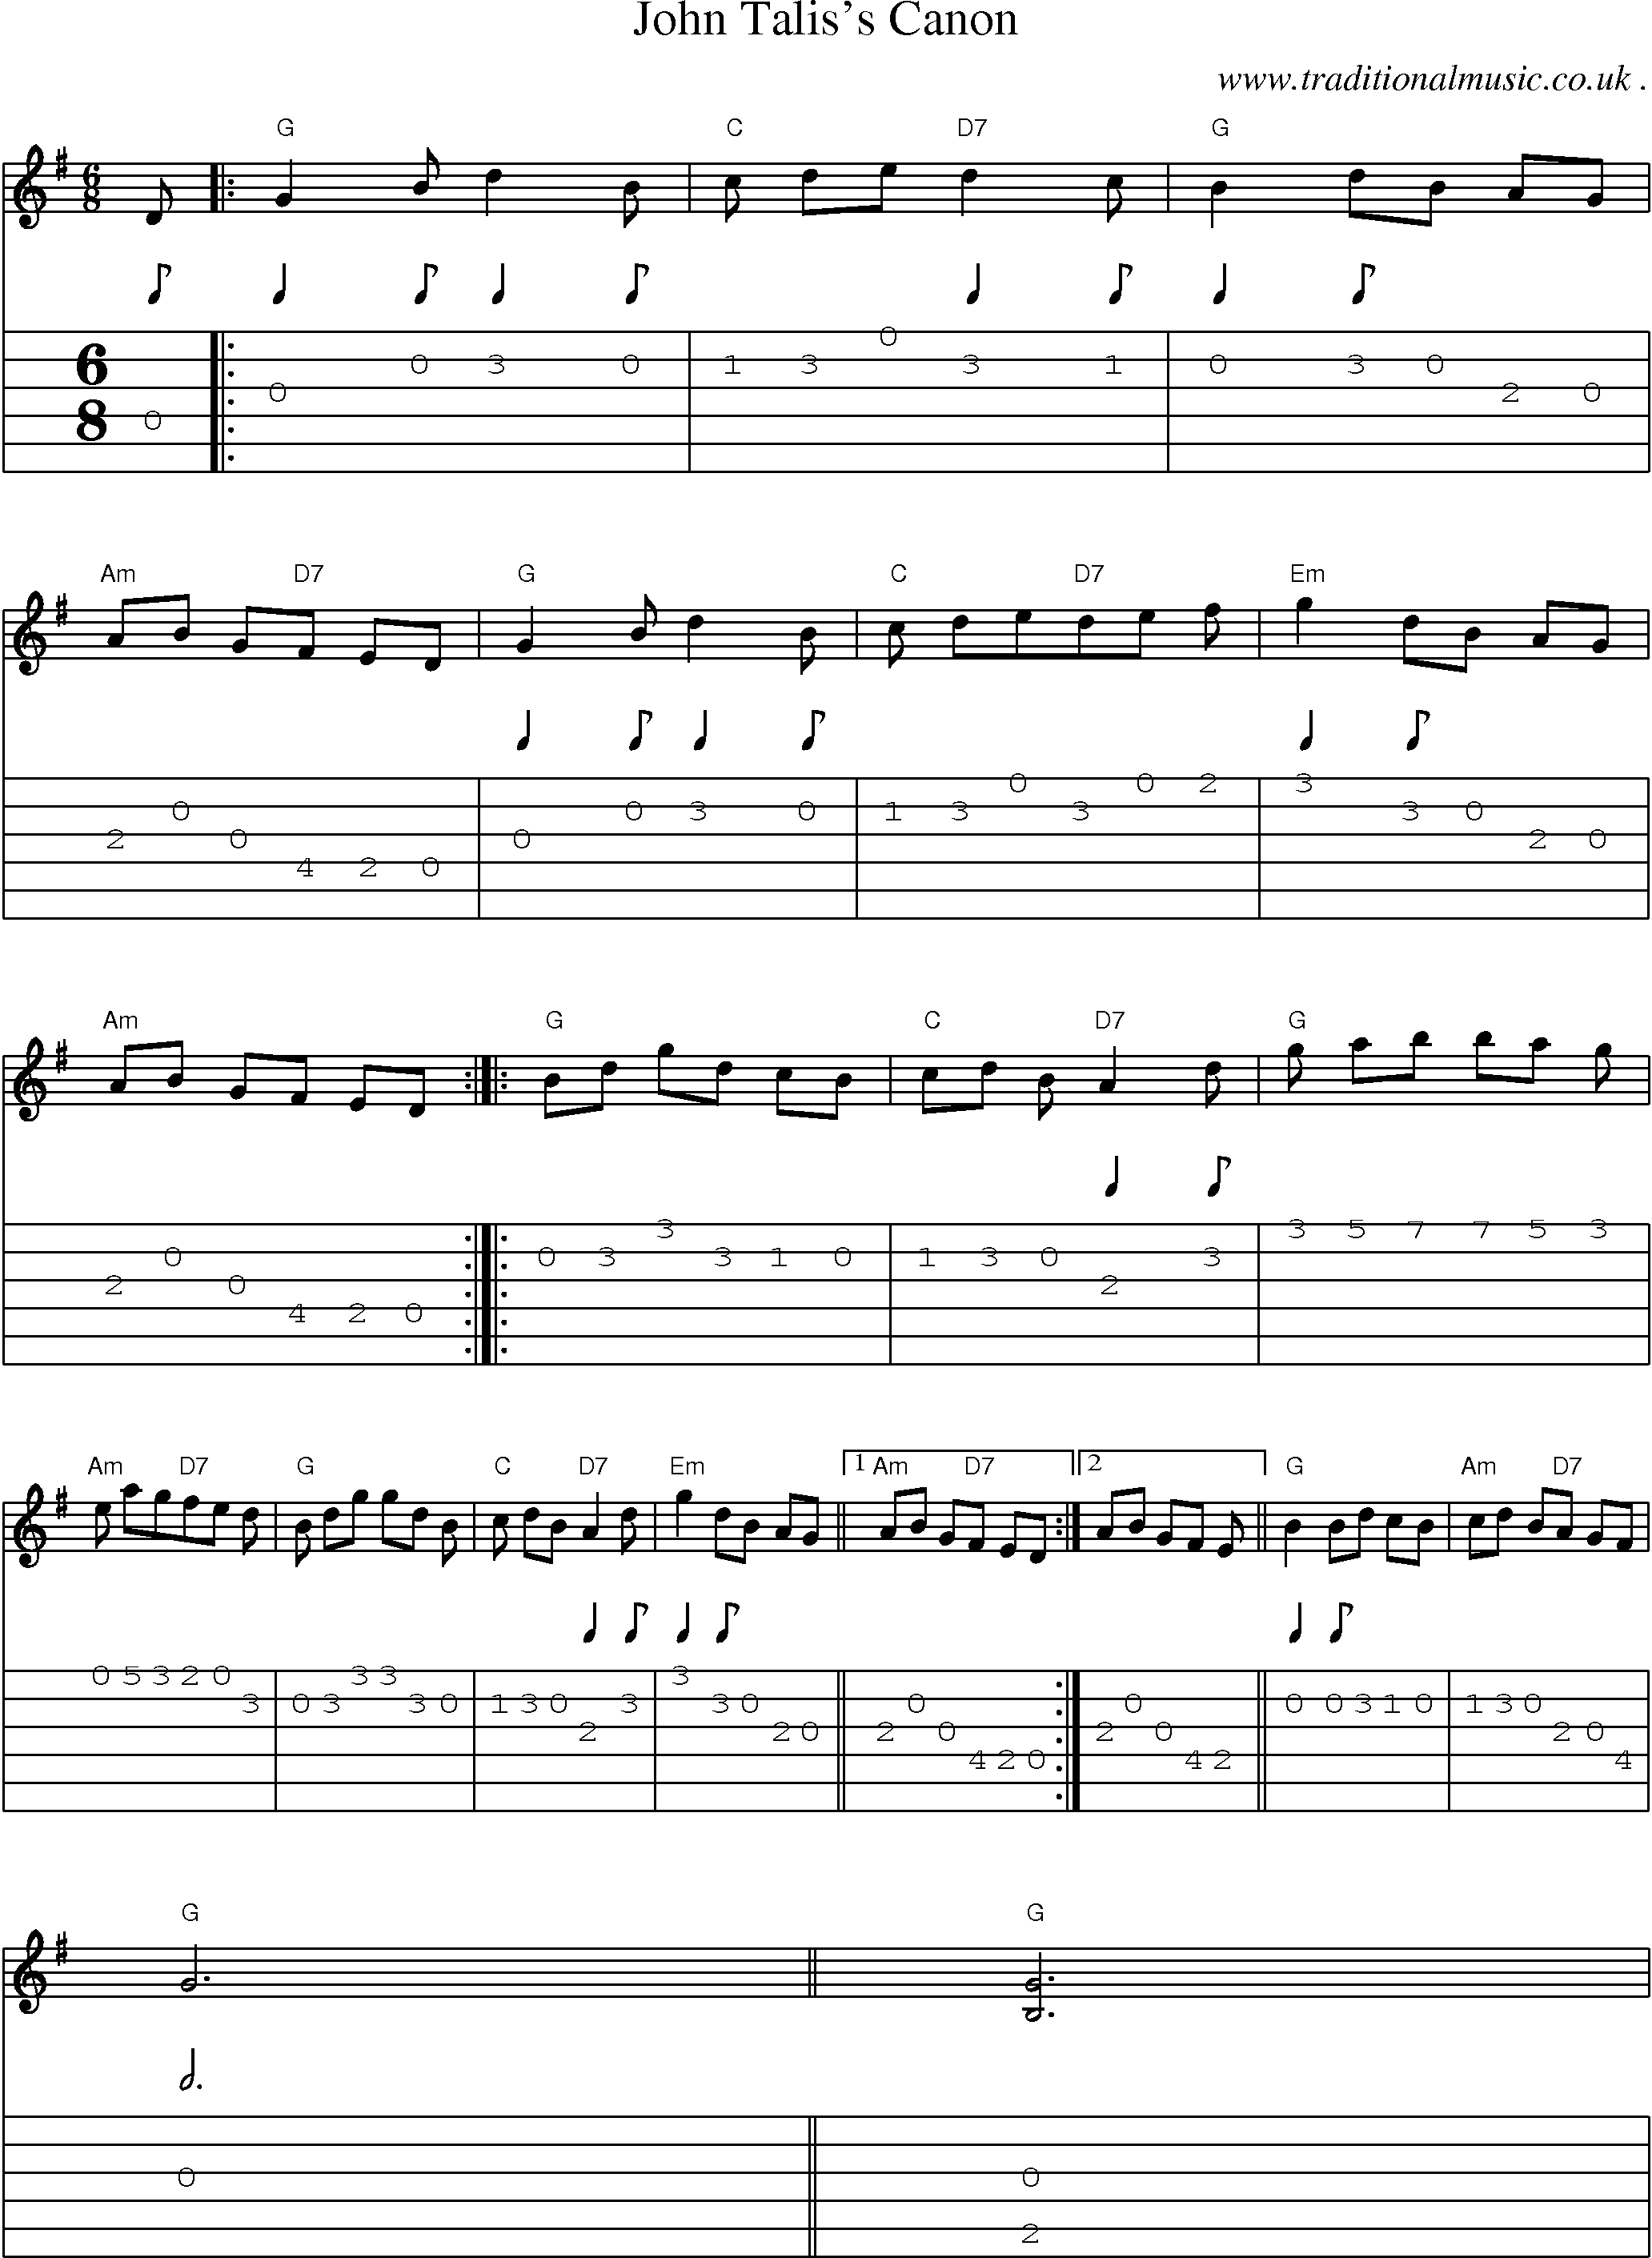 Sheet-Music and Guitar Tabs for John Taliss Canon